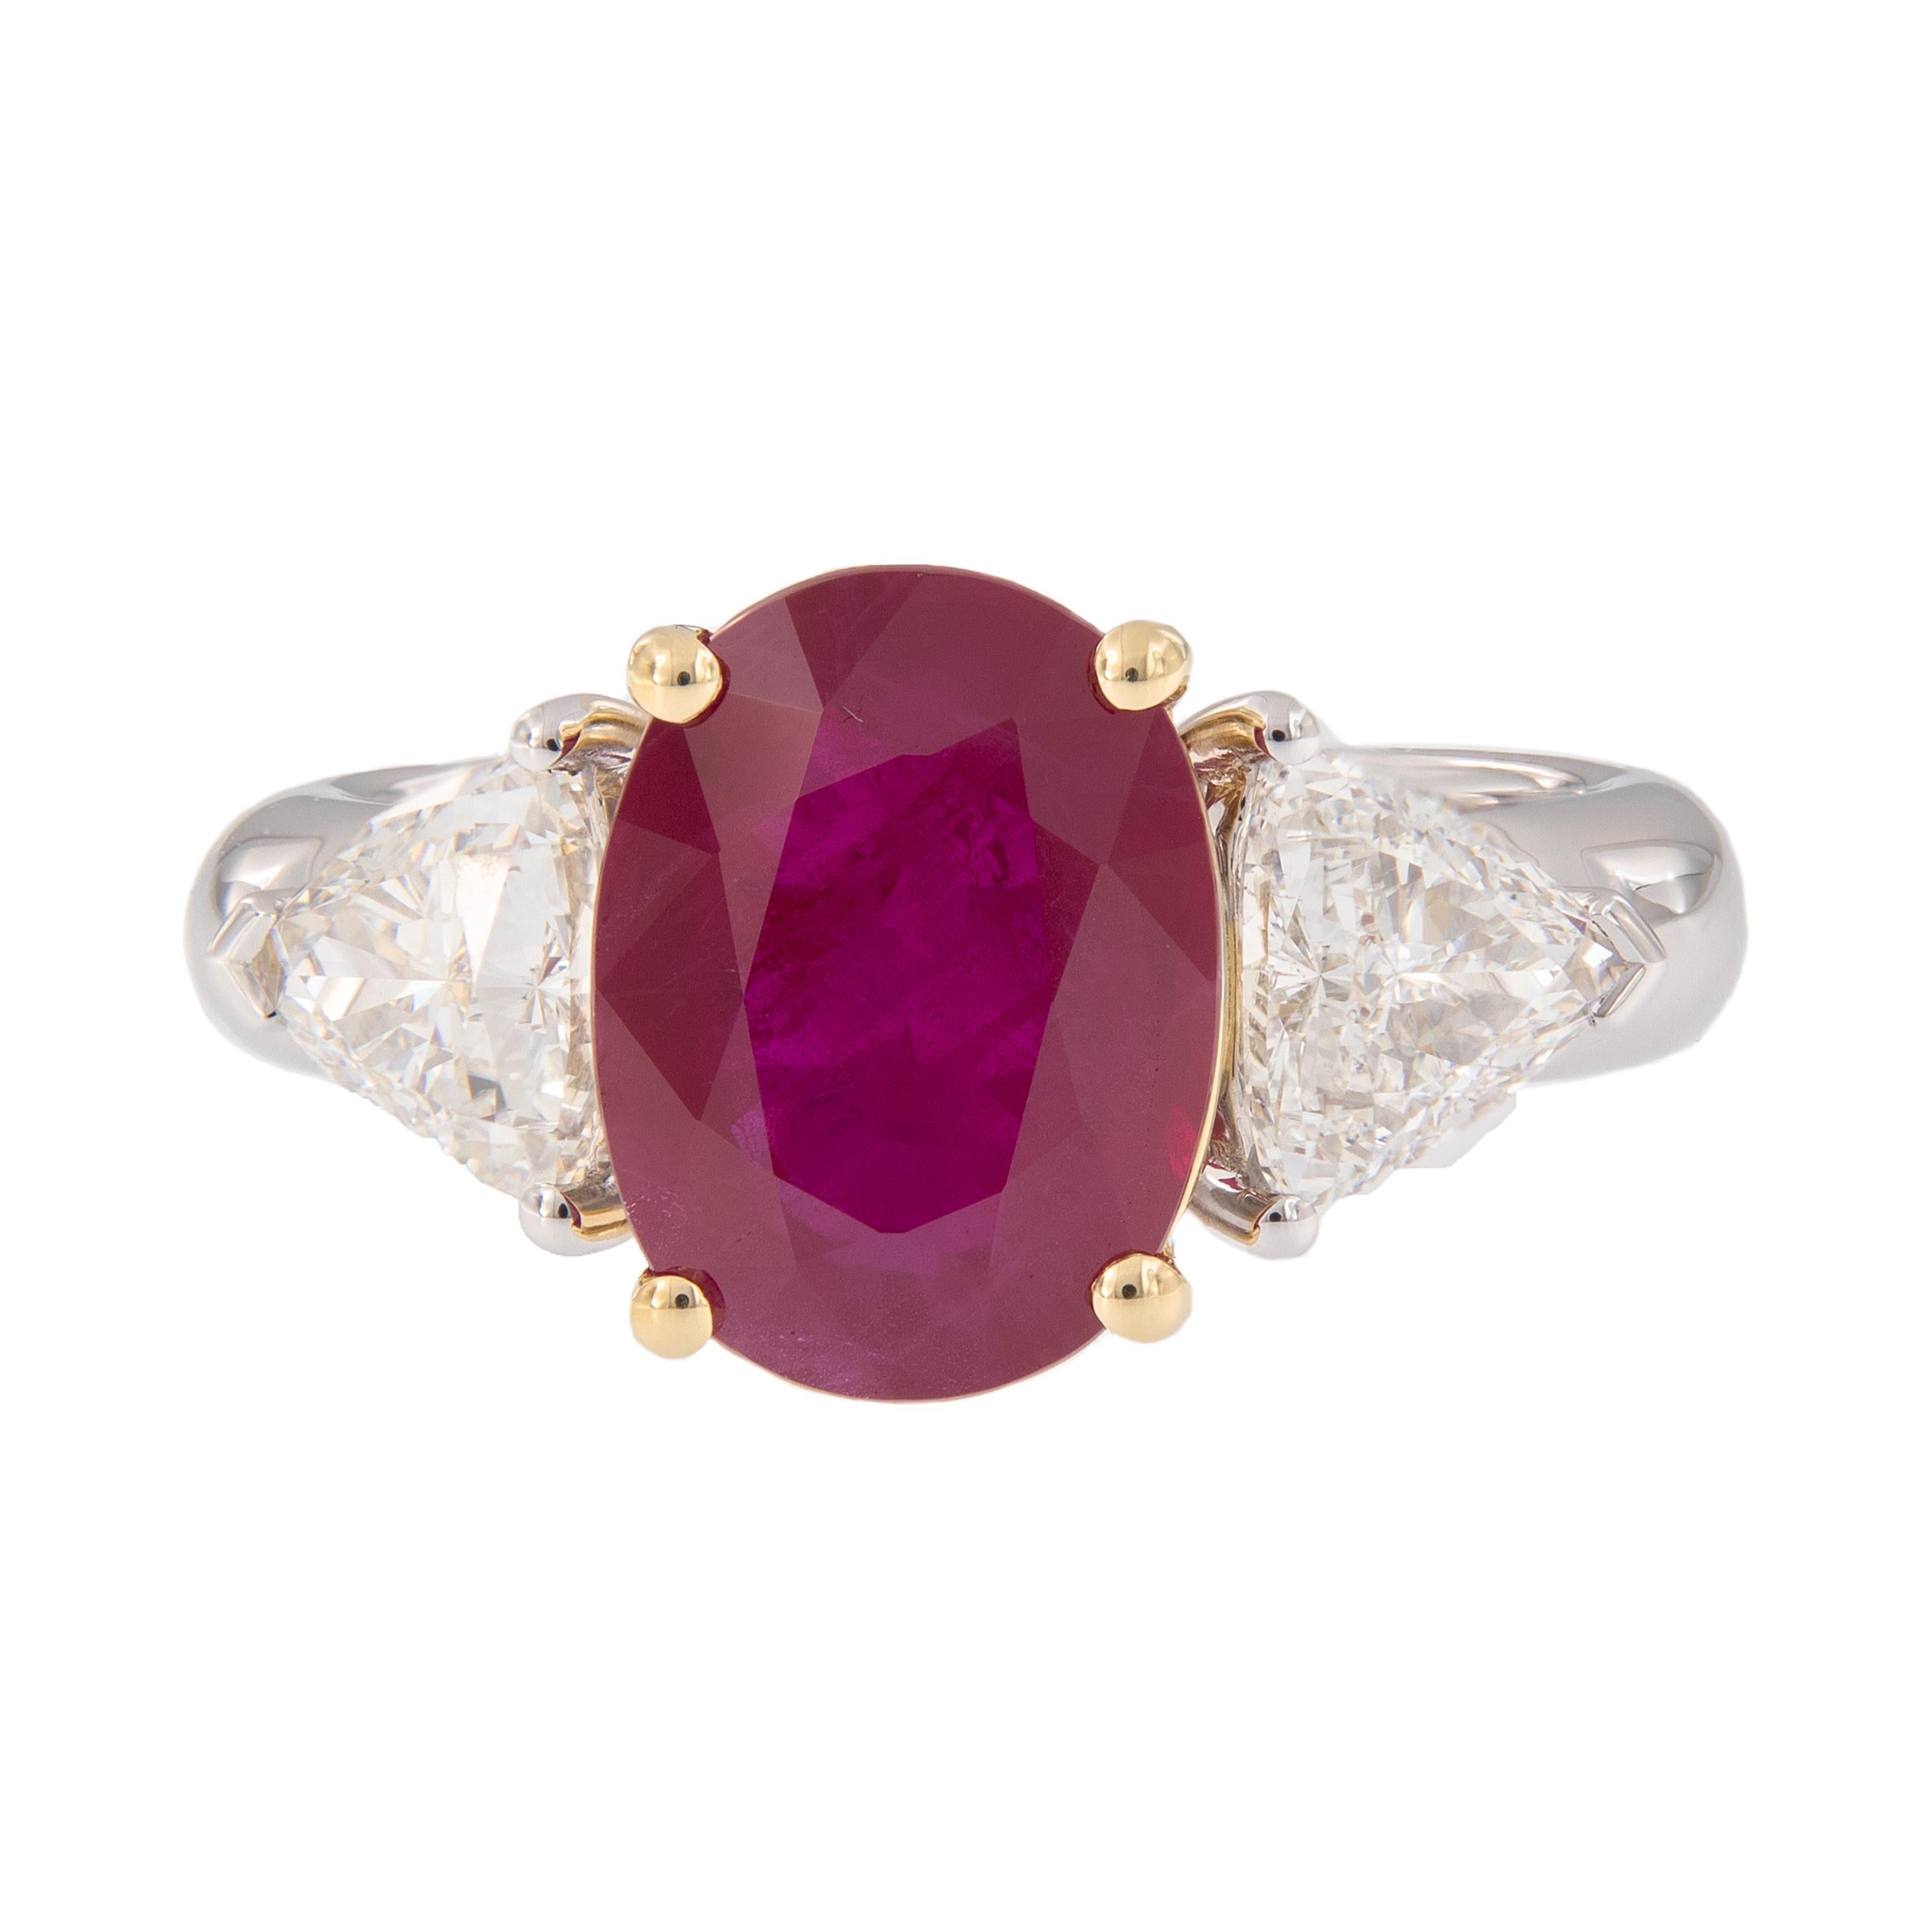 Make a statement with this beautiful and impressive 3-stone ring. The ring centers around a stunning 4.65 carat oval cut natural Burma ruby accented with two trillion-cut diamonds. The ruby is prong set and framed by 18k yellow gold and diamonds and